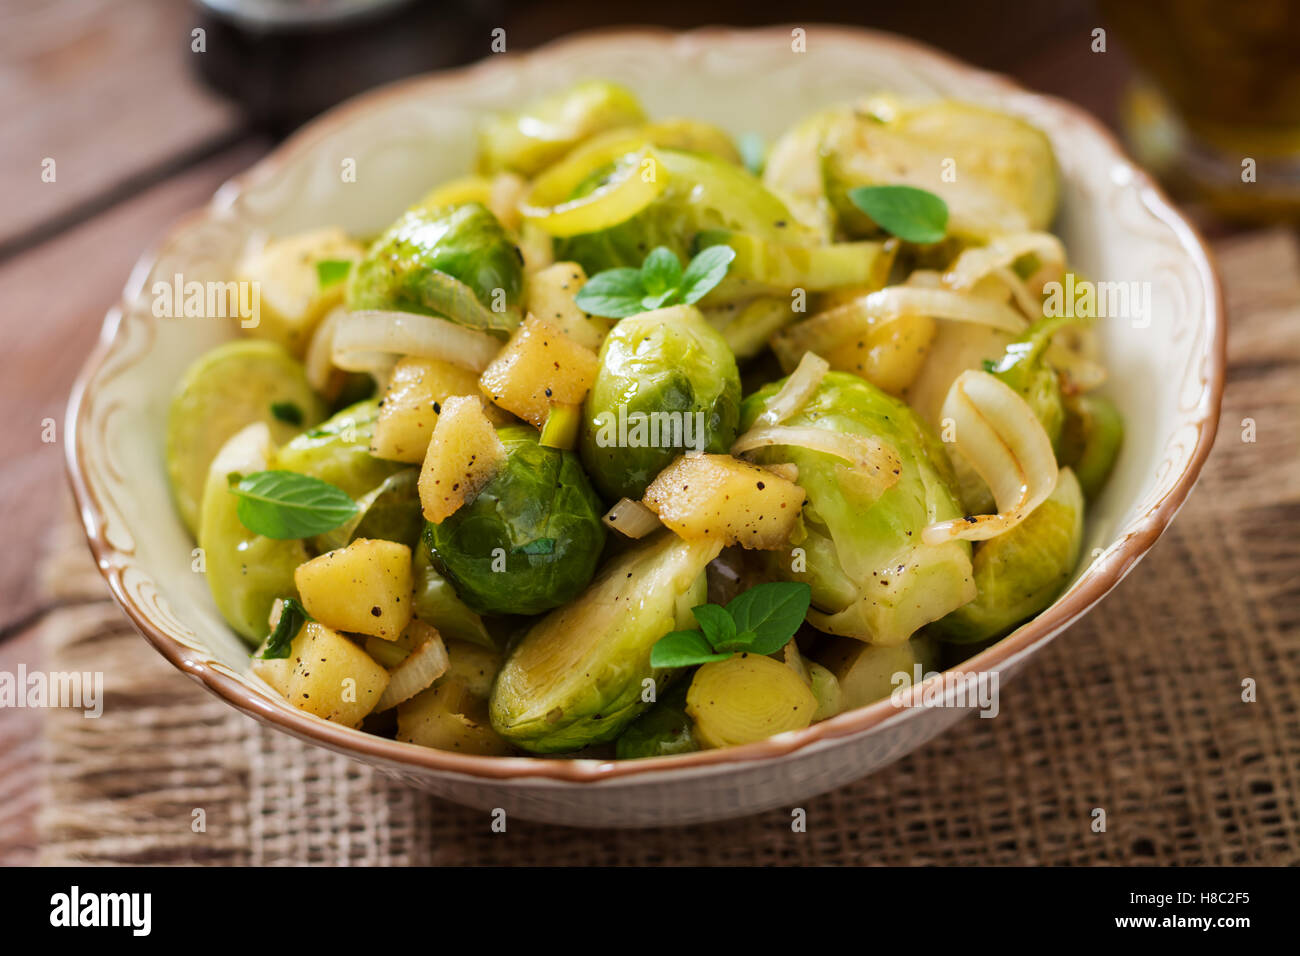 Stewed Brussels cabbage sprouts, apples and leeks in bowl. Dietary menu. Stock Photo